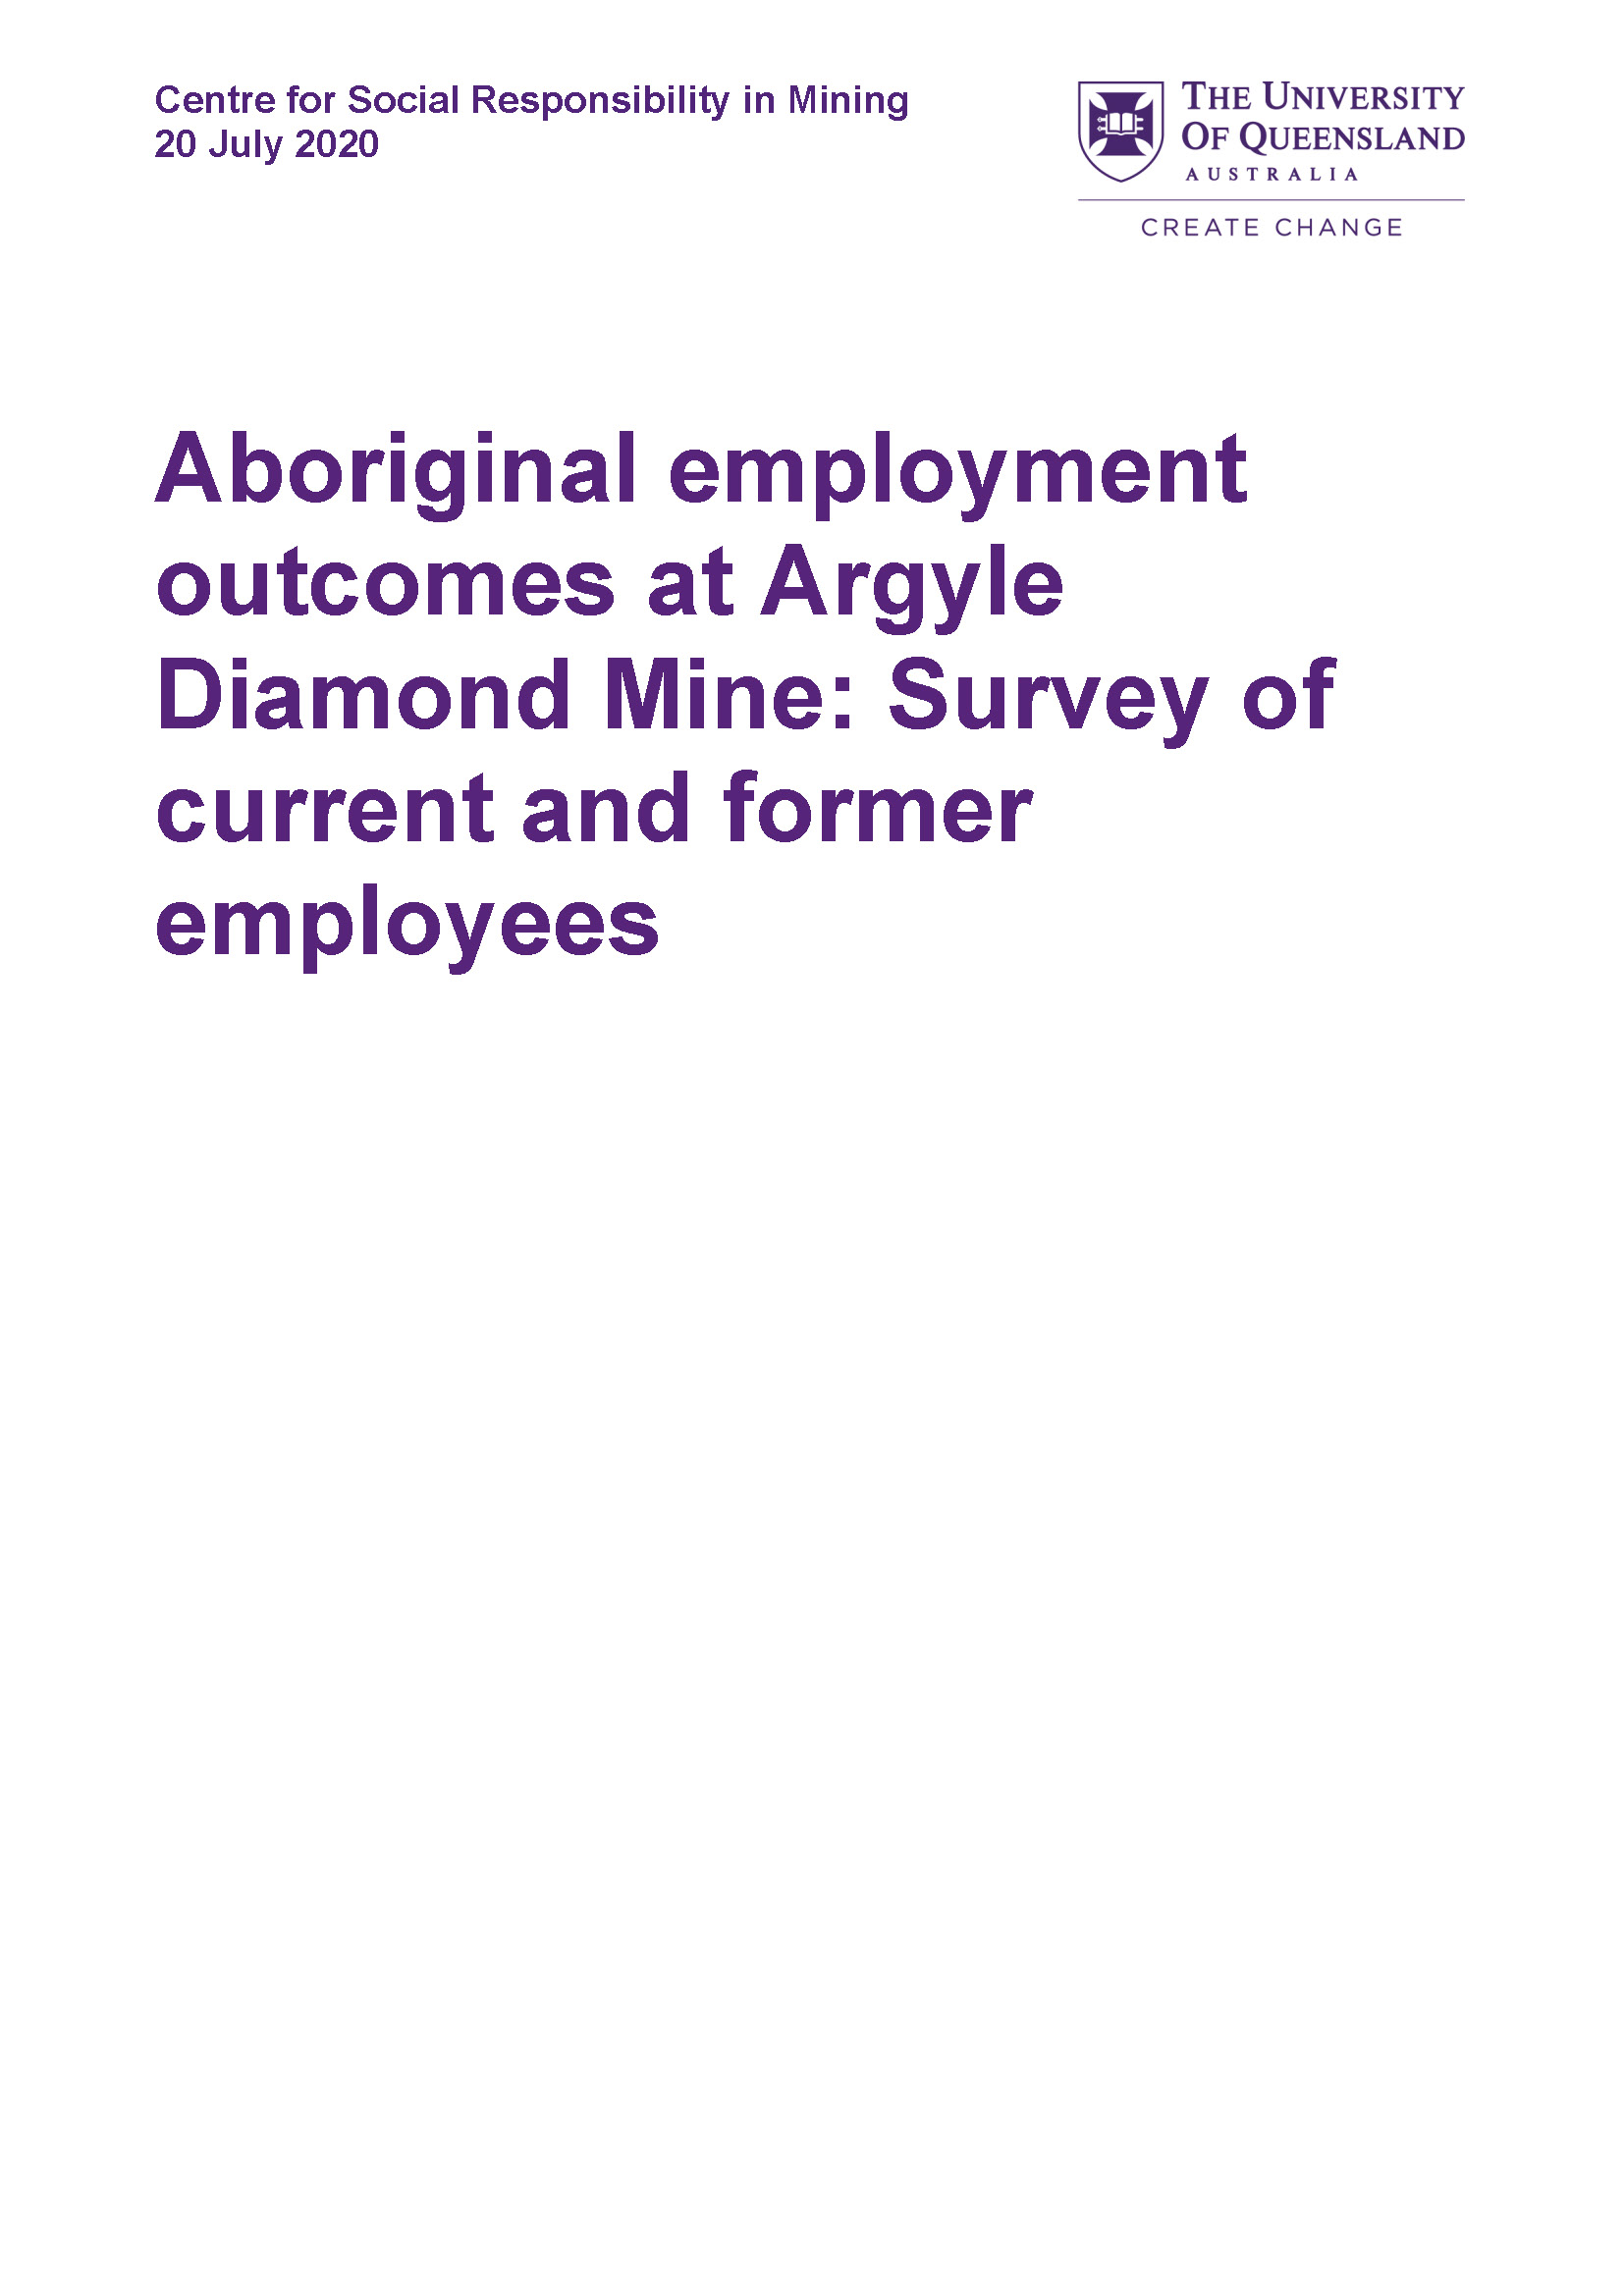 Aboriginal employment outcomes at Argyle Diamond Mine: Survey of current and former employees